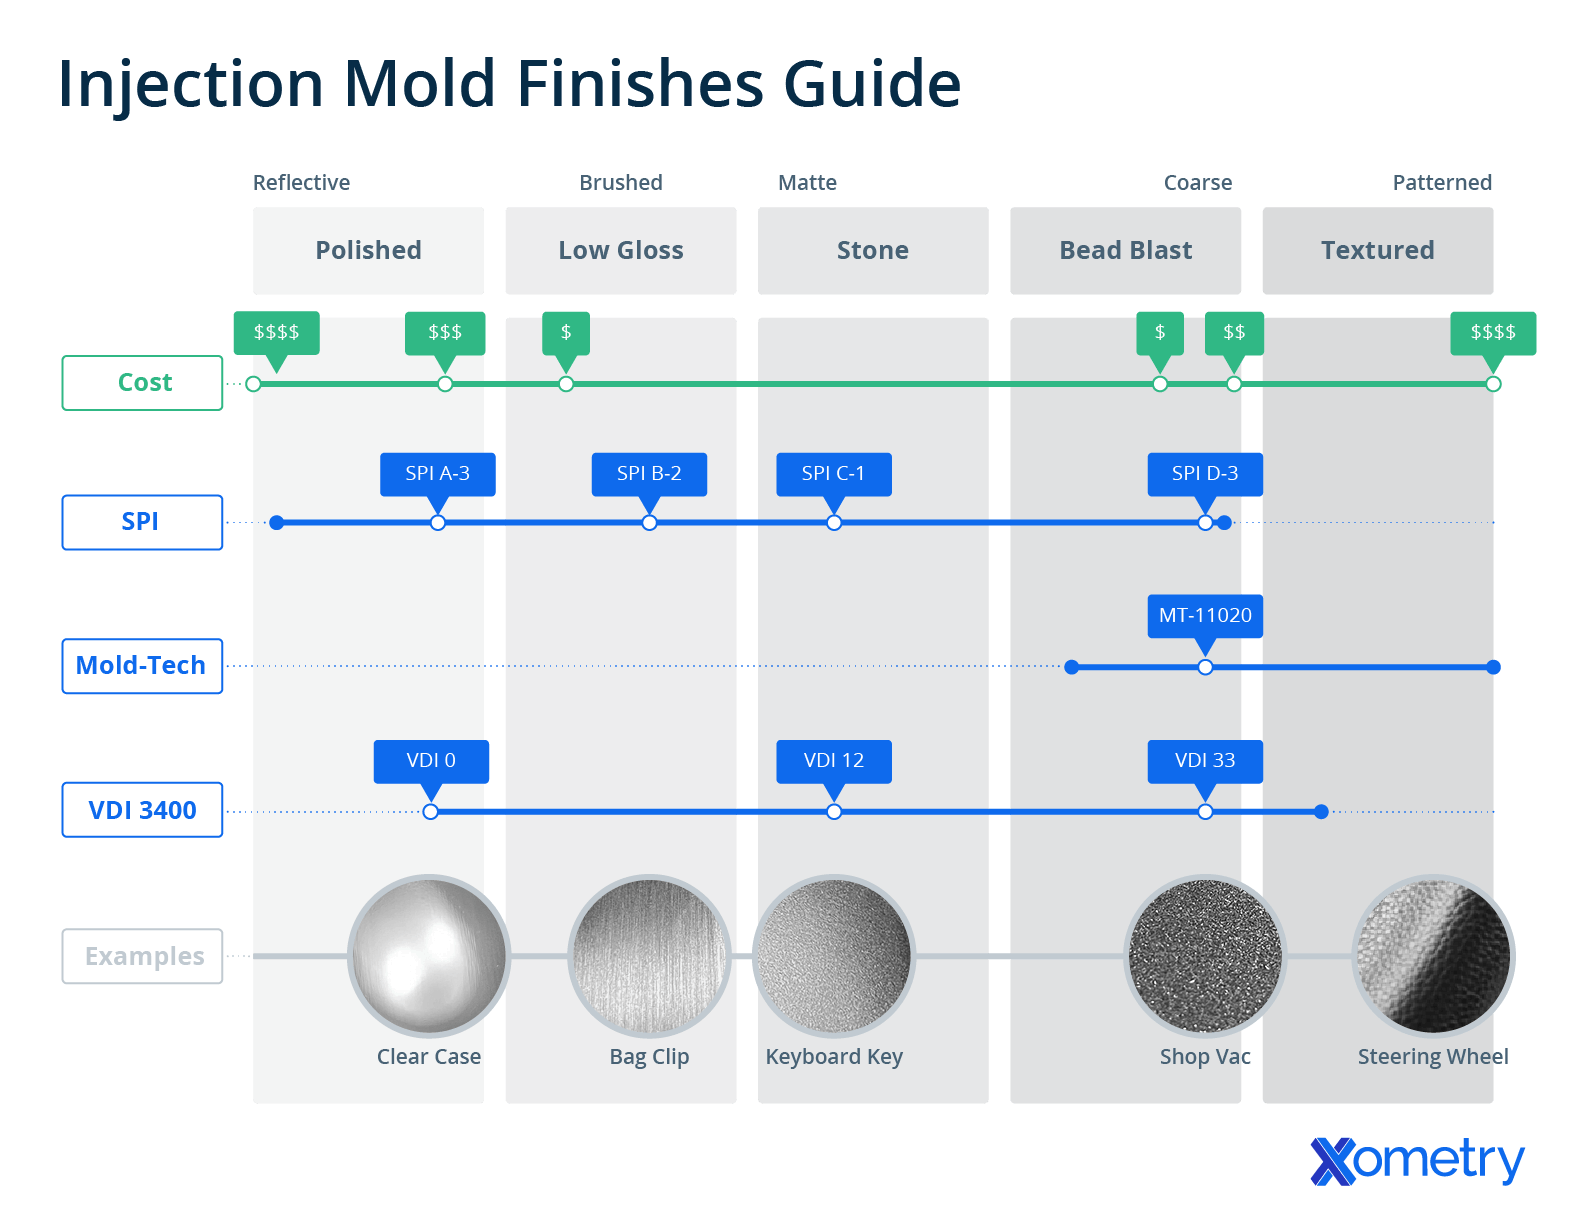 SPI, Mold-Tech, and VDI 3400 injection molding finishes